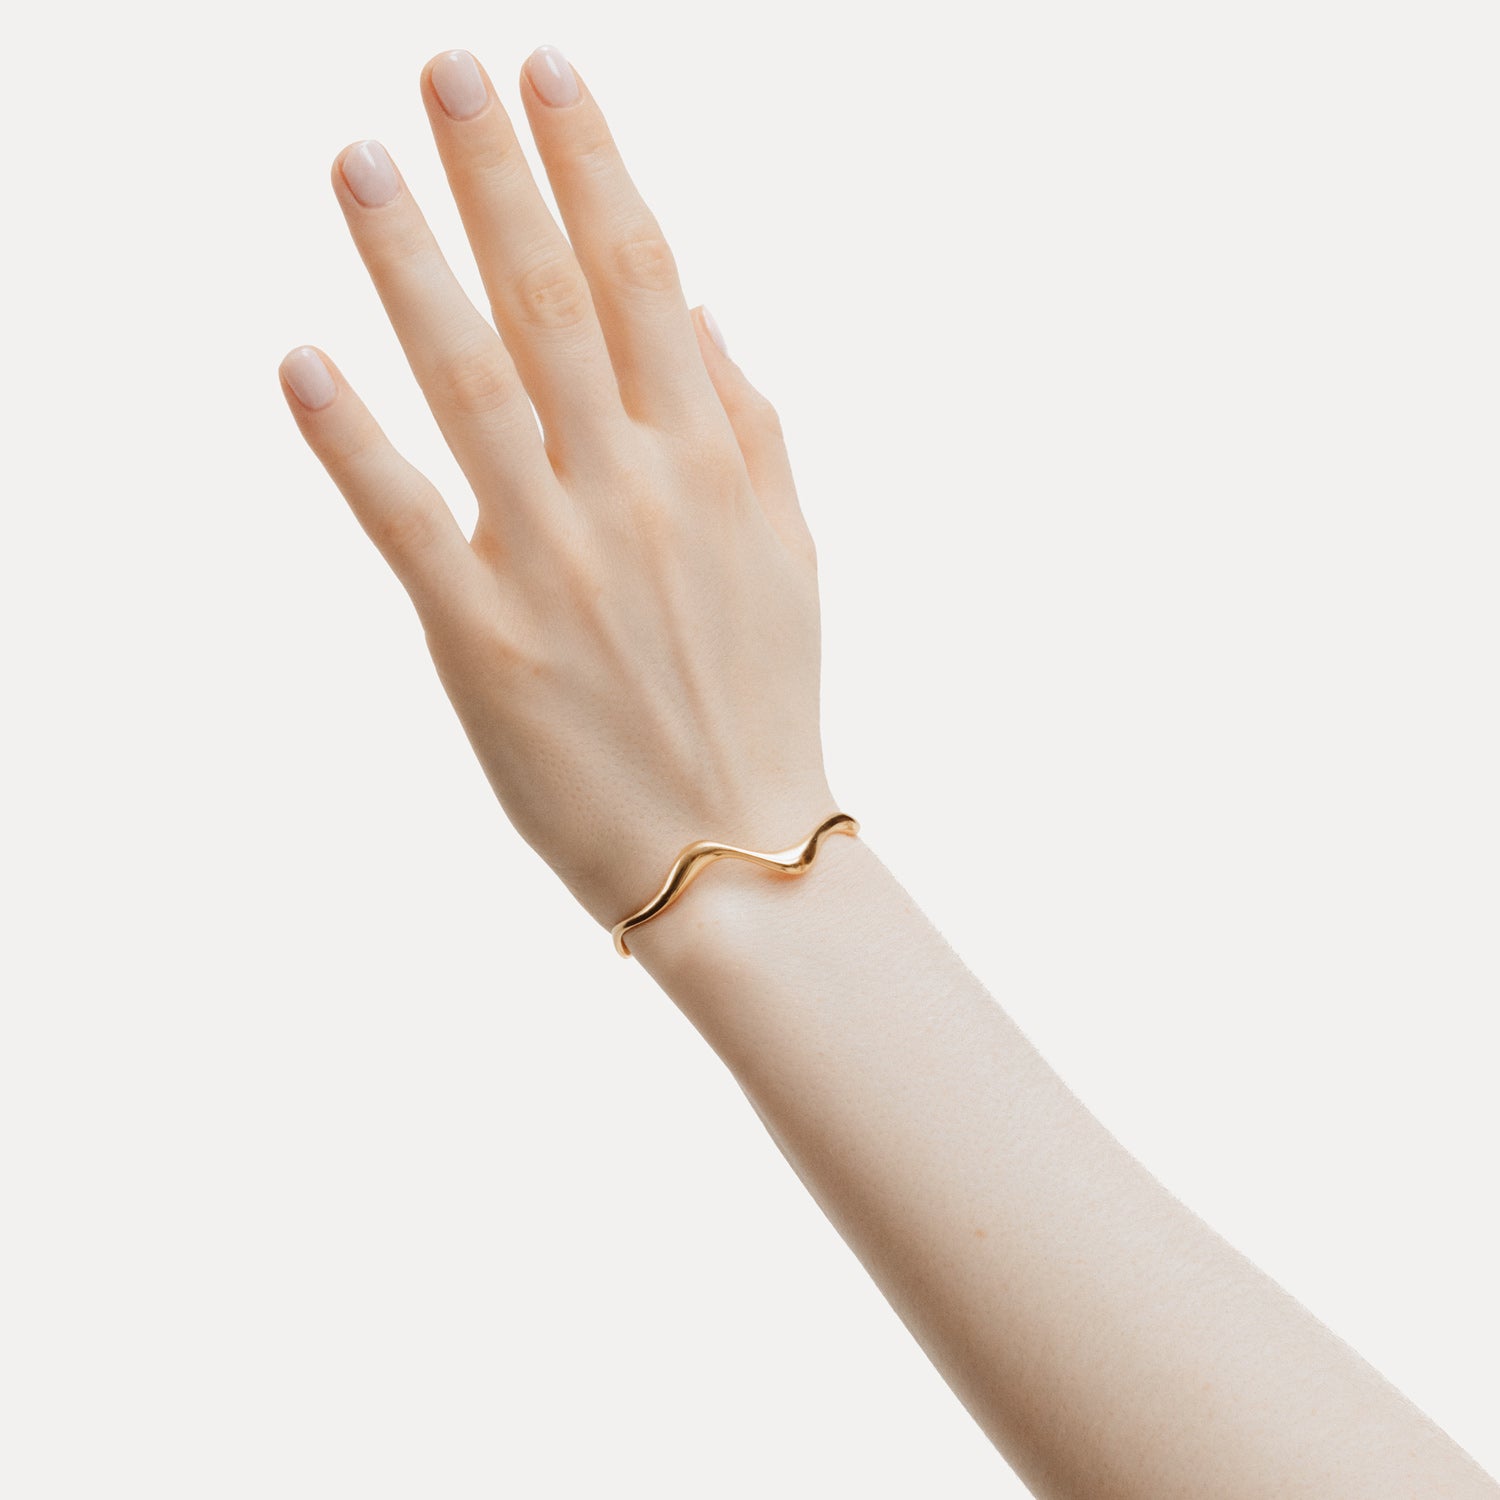 Poise Wave Cuff Bangle, recycled 18k Gold Vermeil, shown on hand - VEYIA Berlin